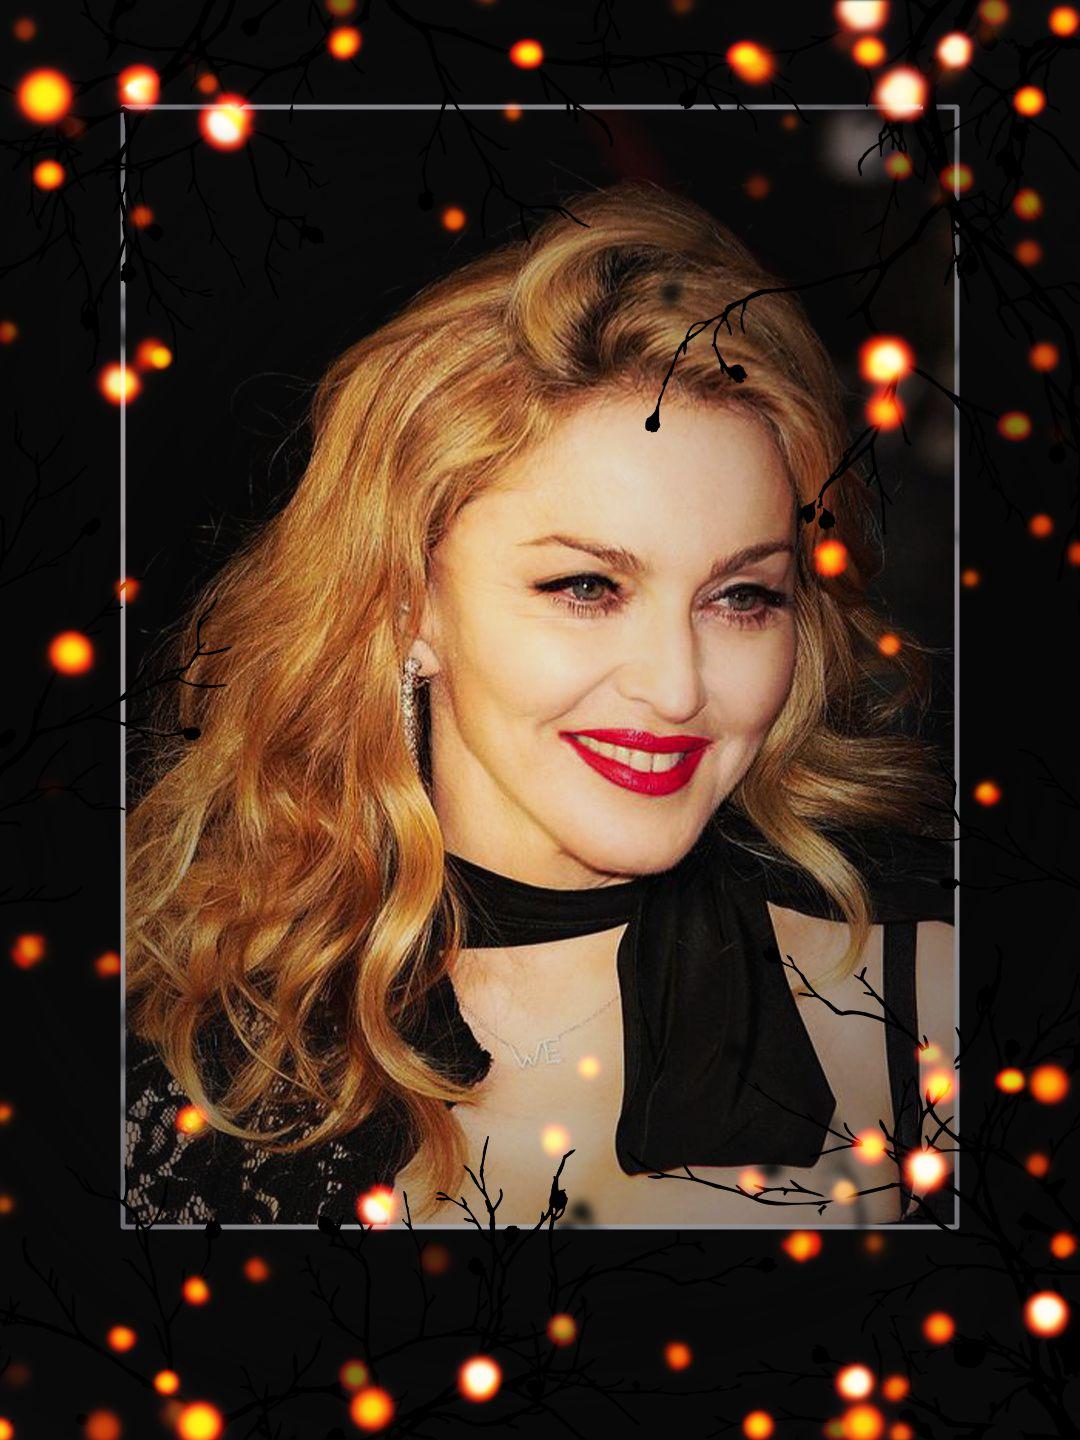 Sane Libyan Sixe Video Hq - Madonna # 41 - Celeb ART - Beautiful Artworks of Celebrities, Footballers,  Politicians and Famous People in World | OpenSea